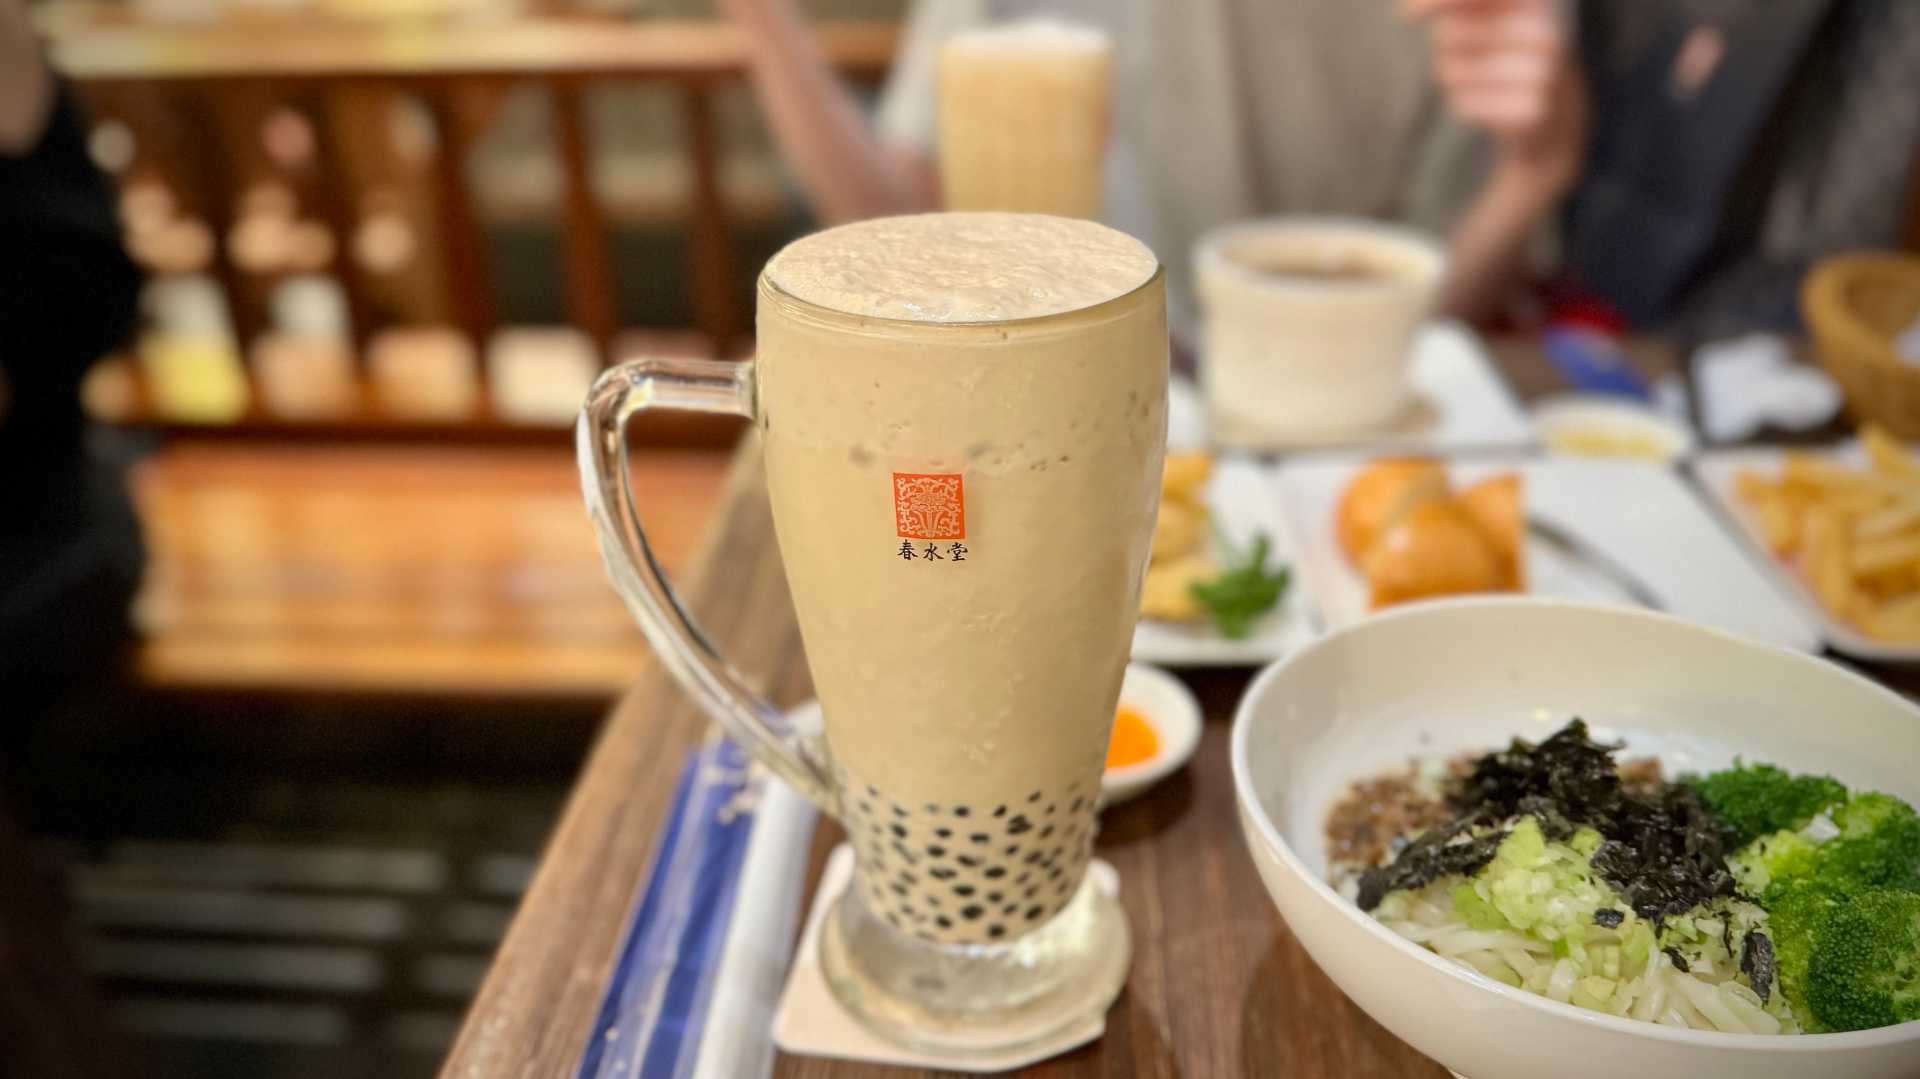 A large glass cup of iced milk bubble tea, on a table alongside various small dishes such as a bowl of noodles and vegetables, and some bread.